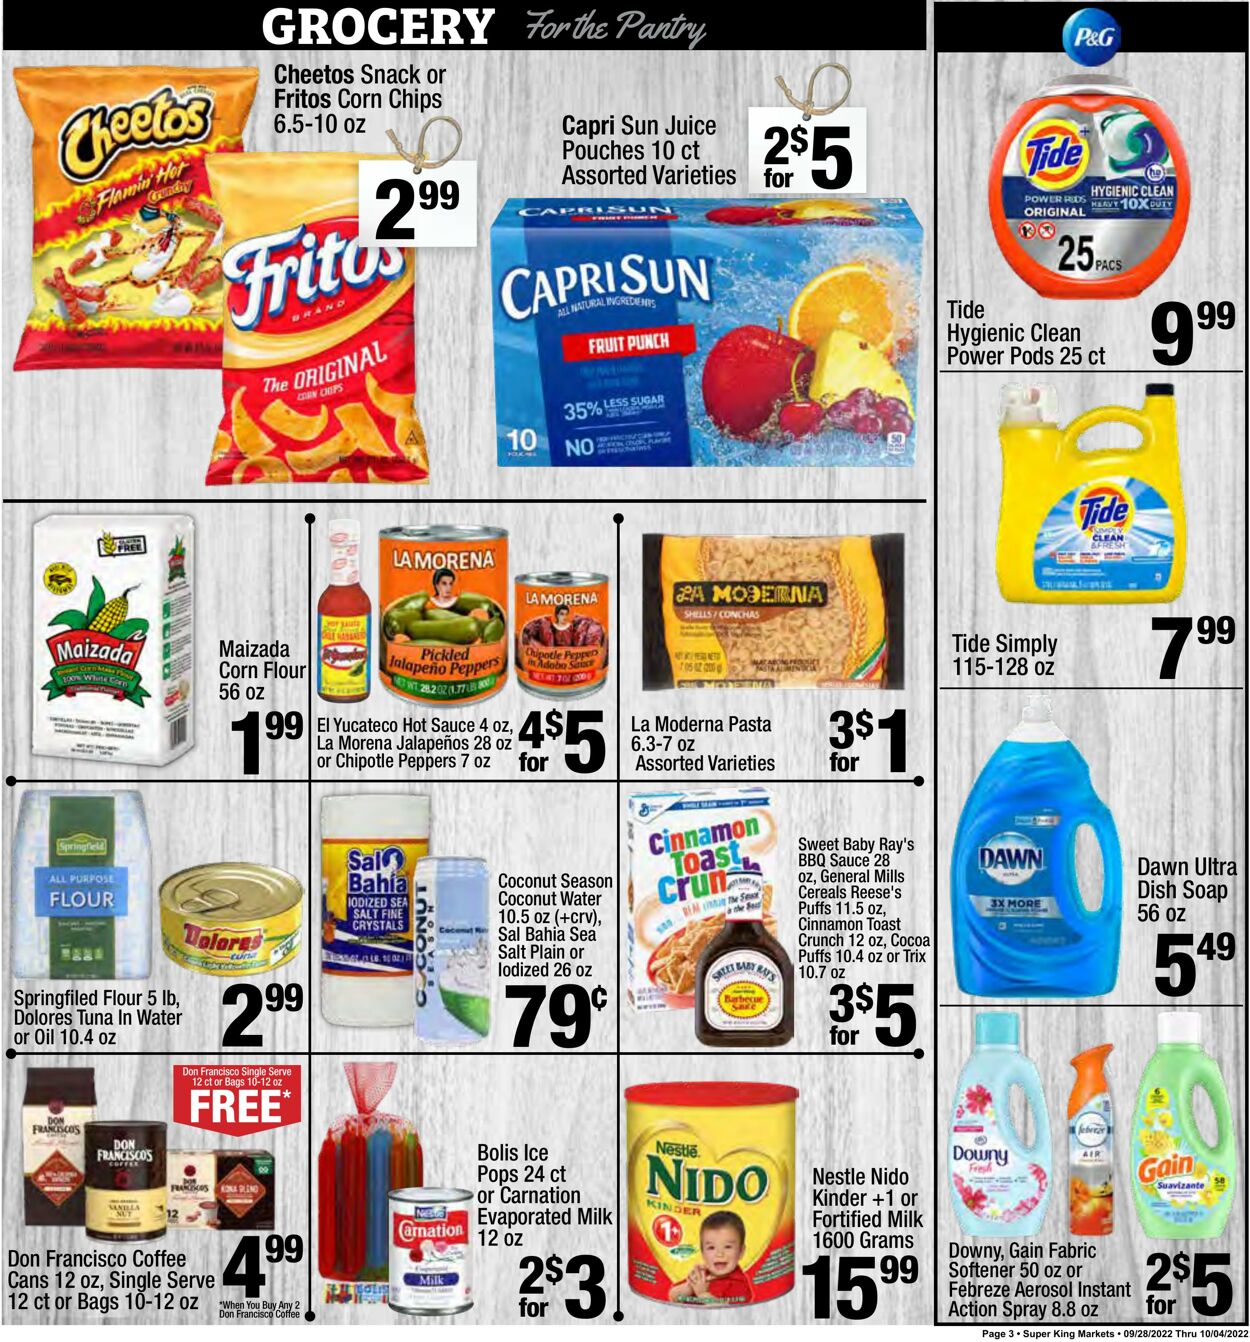 Weekly ad Super King Markets 09/28/2022 - 10/04/2022